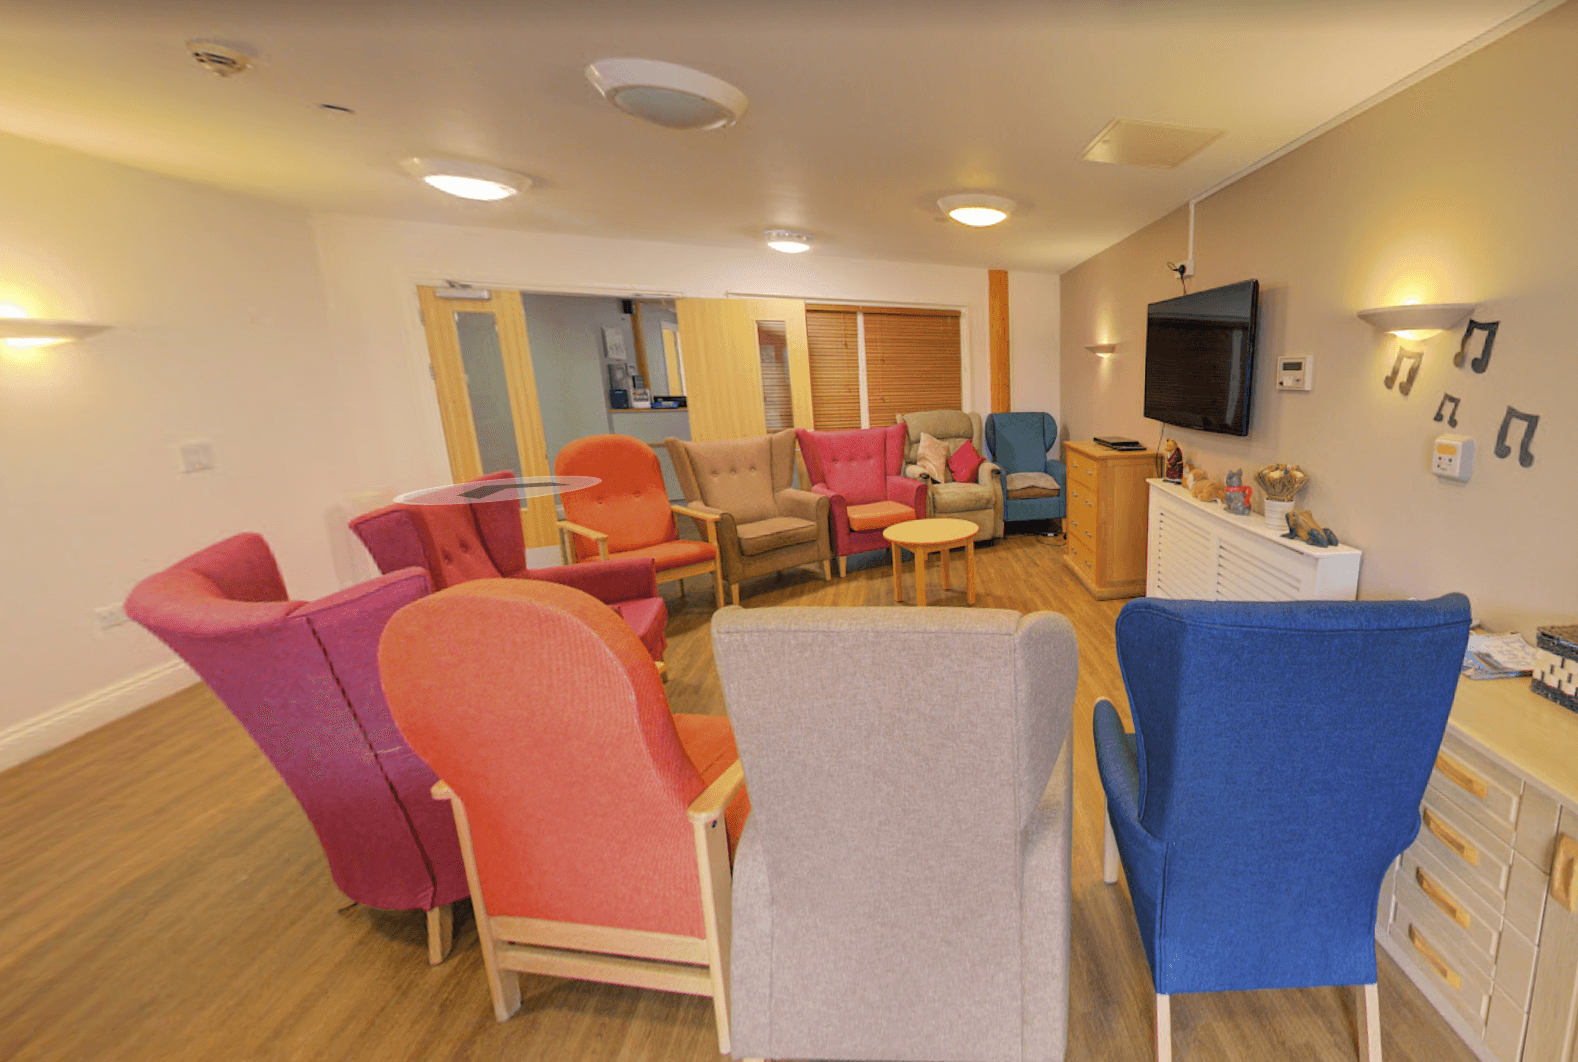 Shaw Healthcare - Sycamore Lodge care home 006